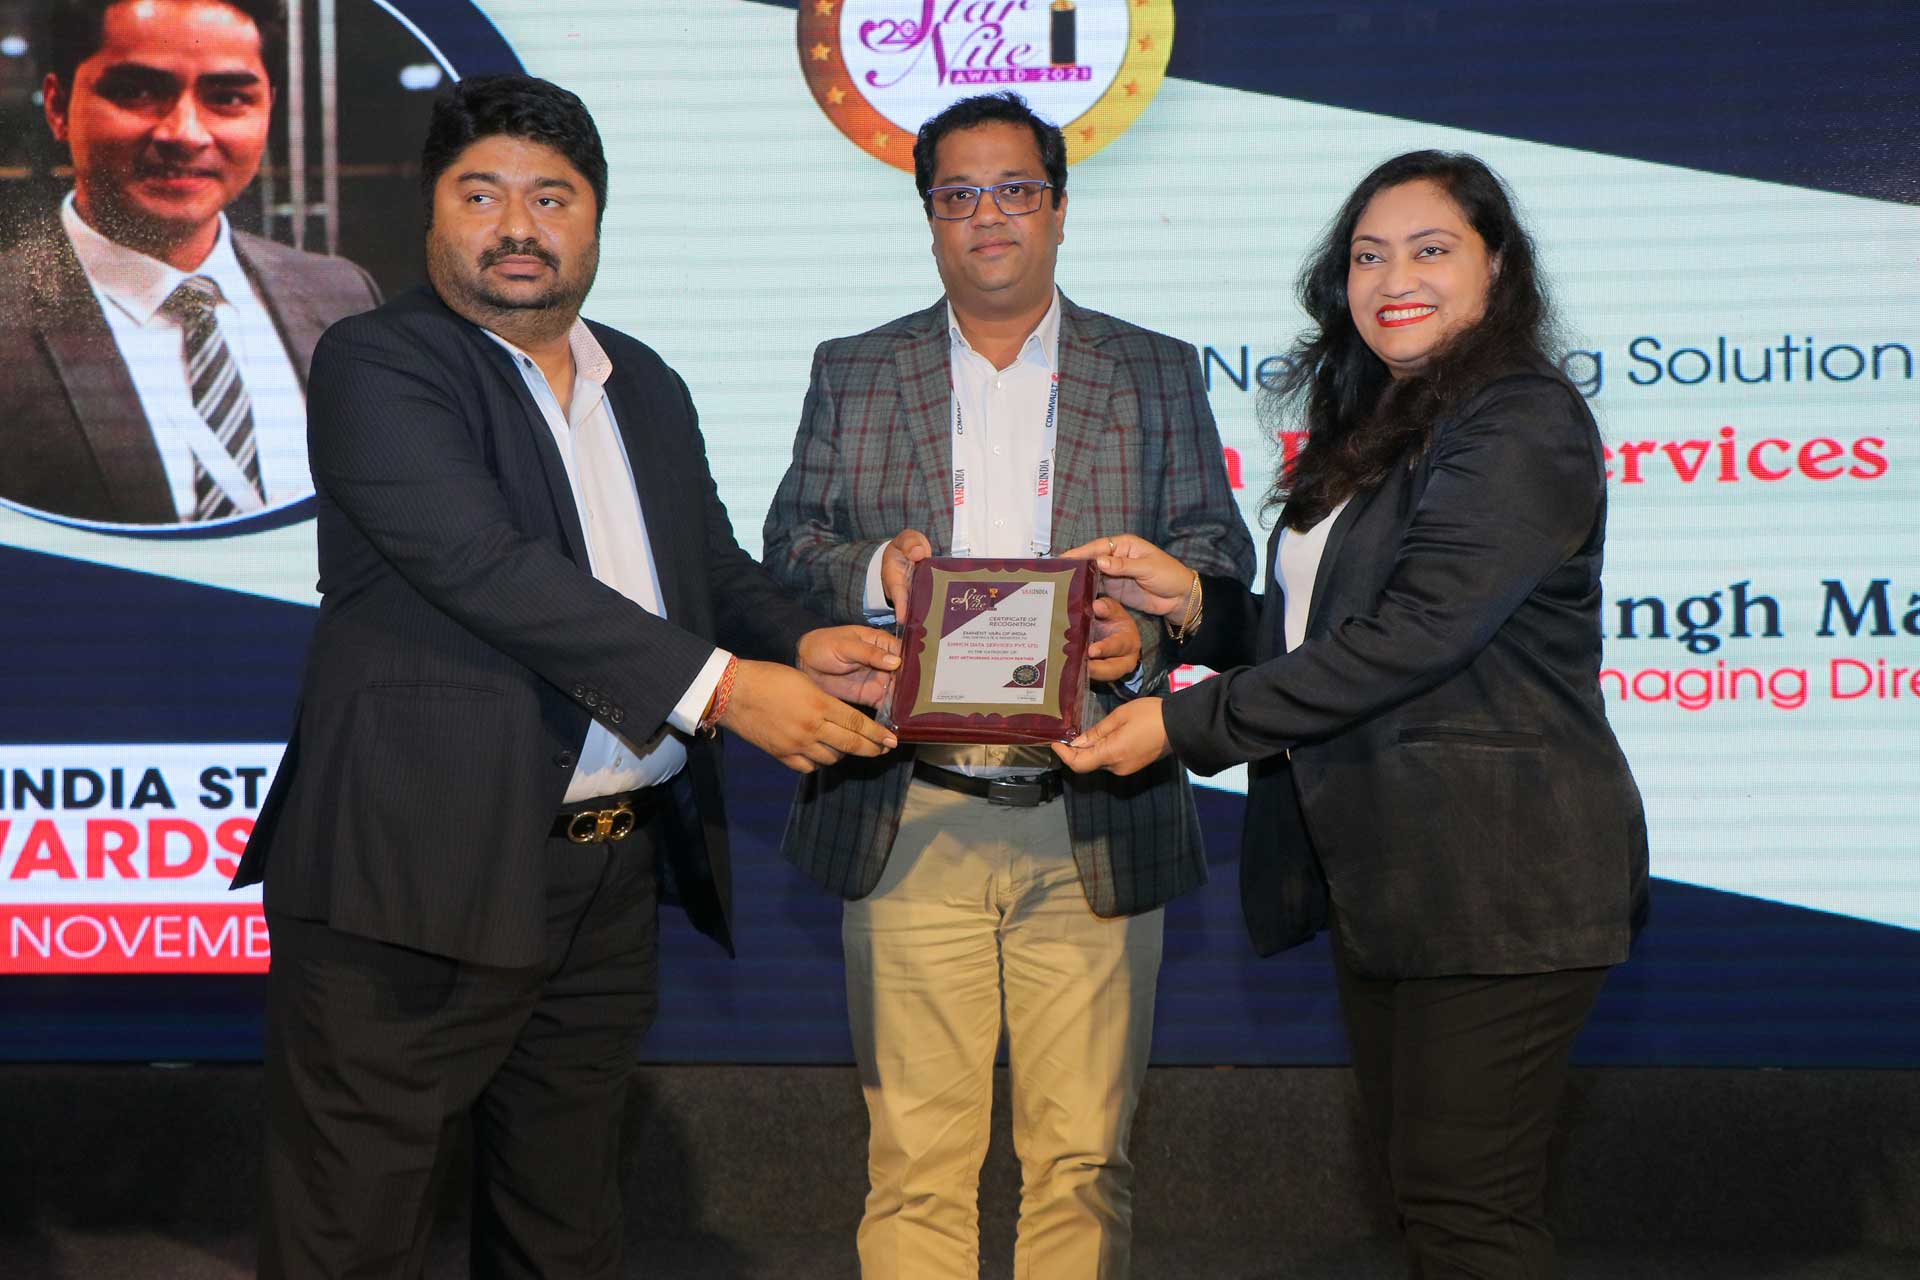 Best Networking Solution Partner Award goes to Enrich Data Services Pvt. Ltd. at 20th Star Nite Awards 2021